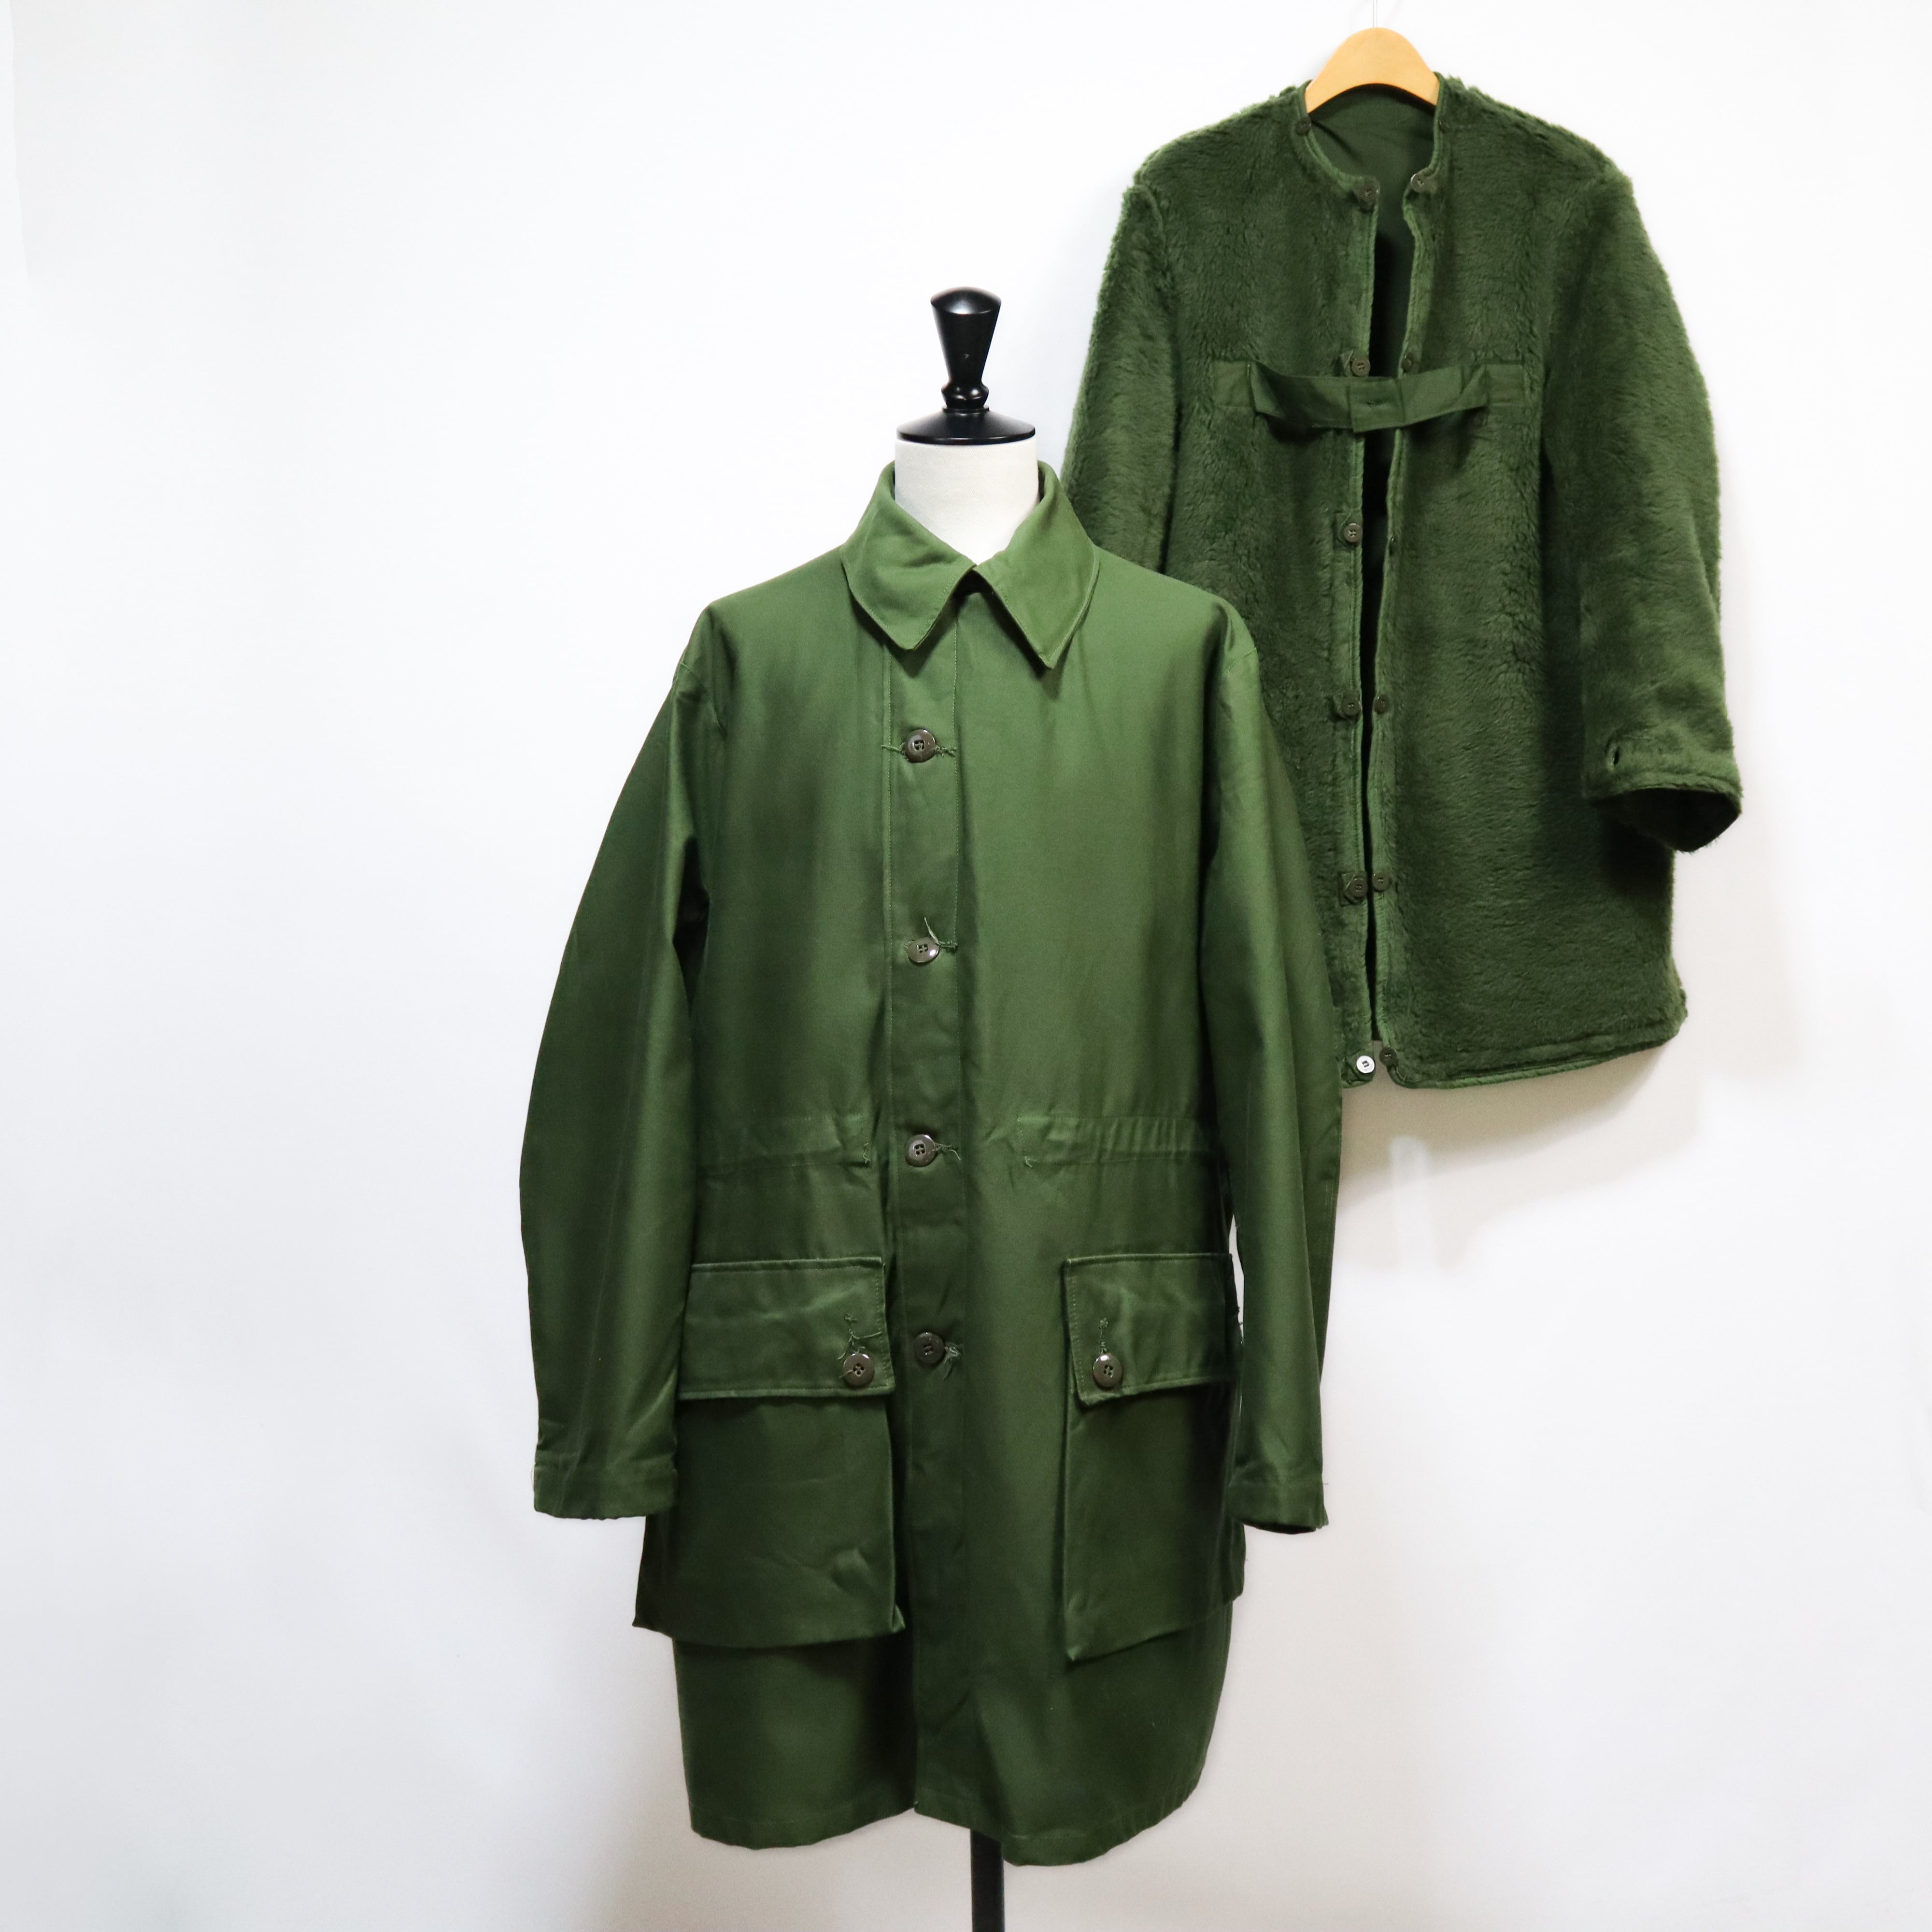 SWEDISH ARMY M-59 FIELD COAT WITH LINER C50 スウェーデン